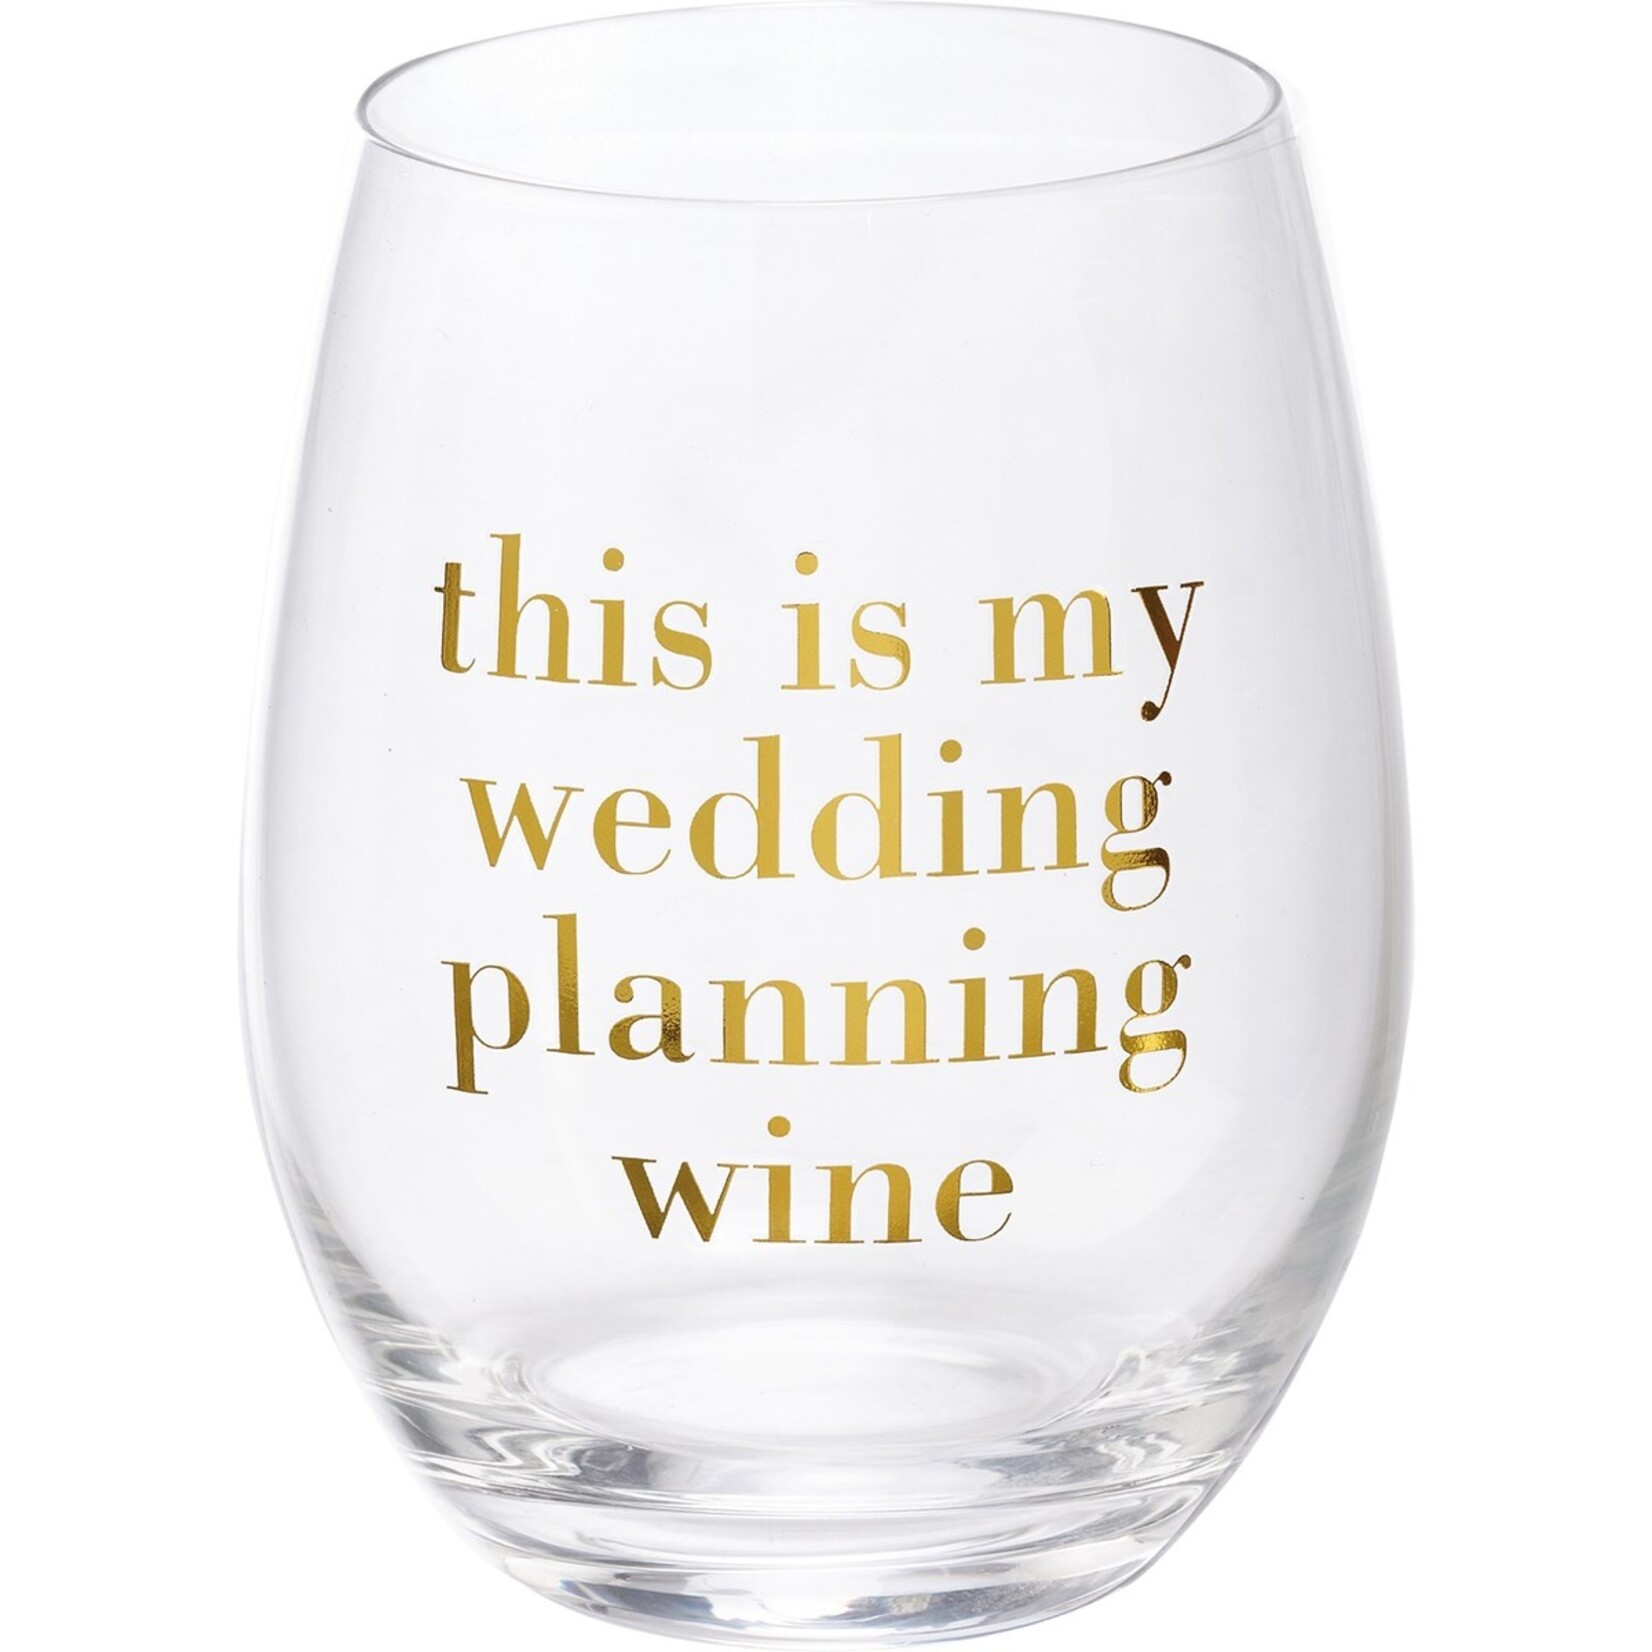 Primitives by Kathy Primitives by Kathy This Is My Wedding Planning Wine Wine Glass